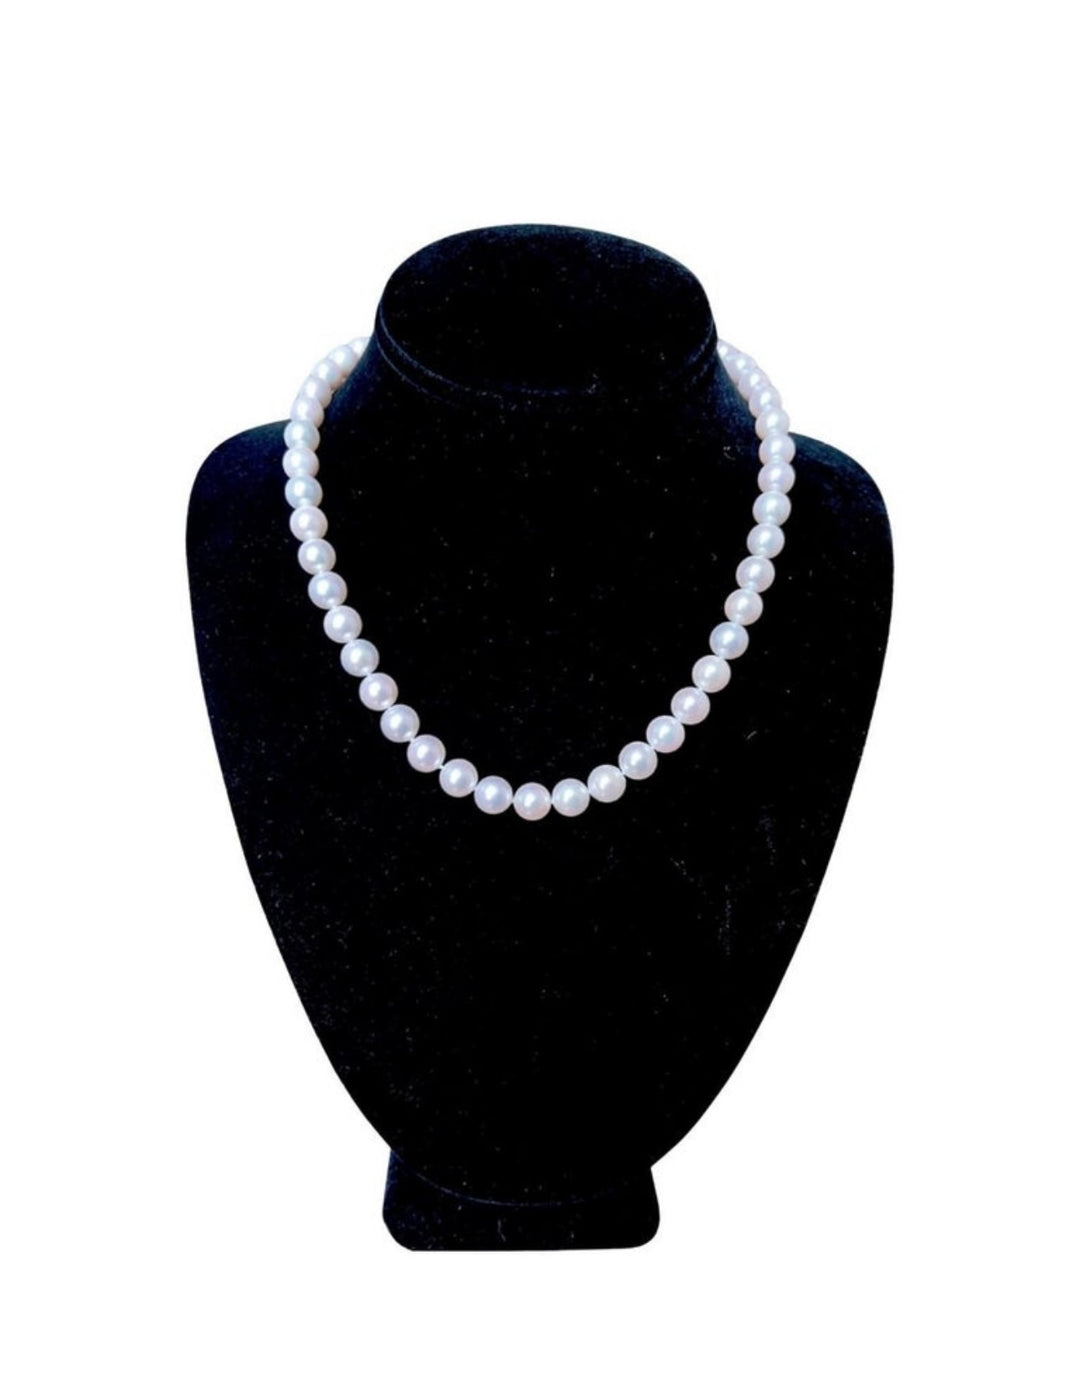 Japanese Cultured Akoya Pearl Necklace